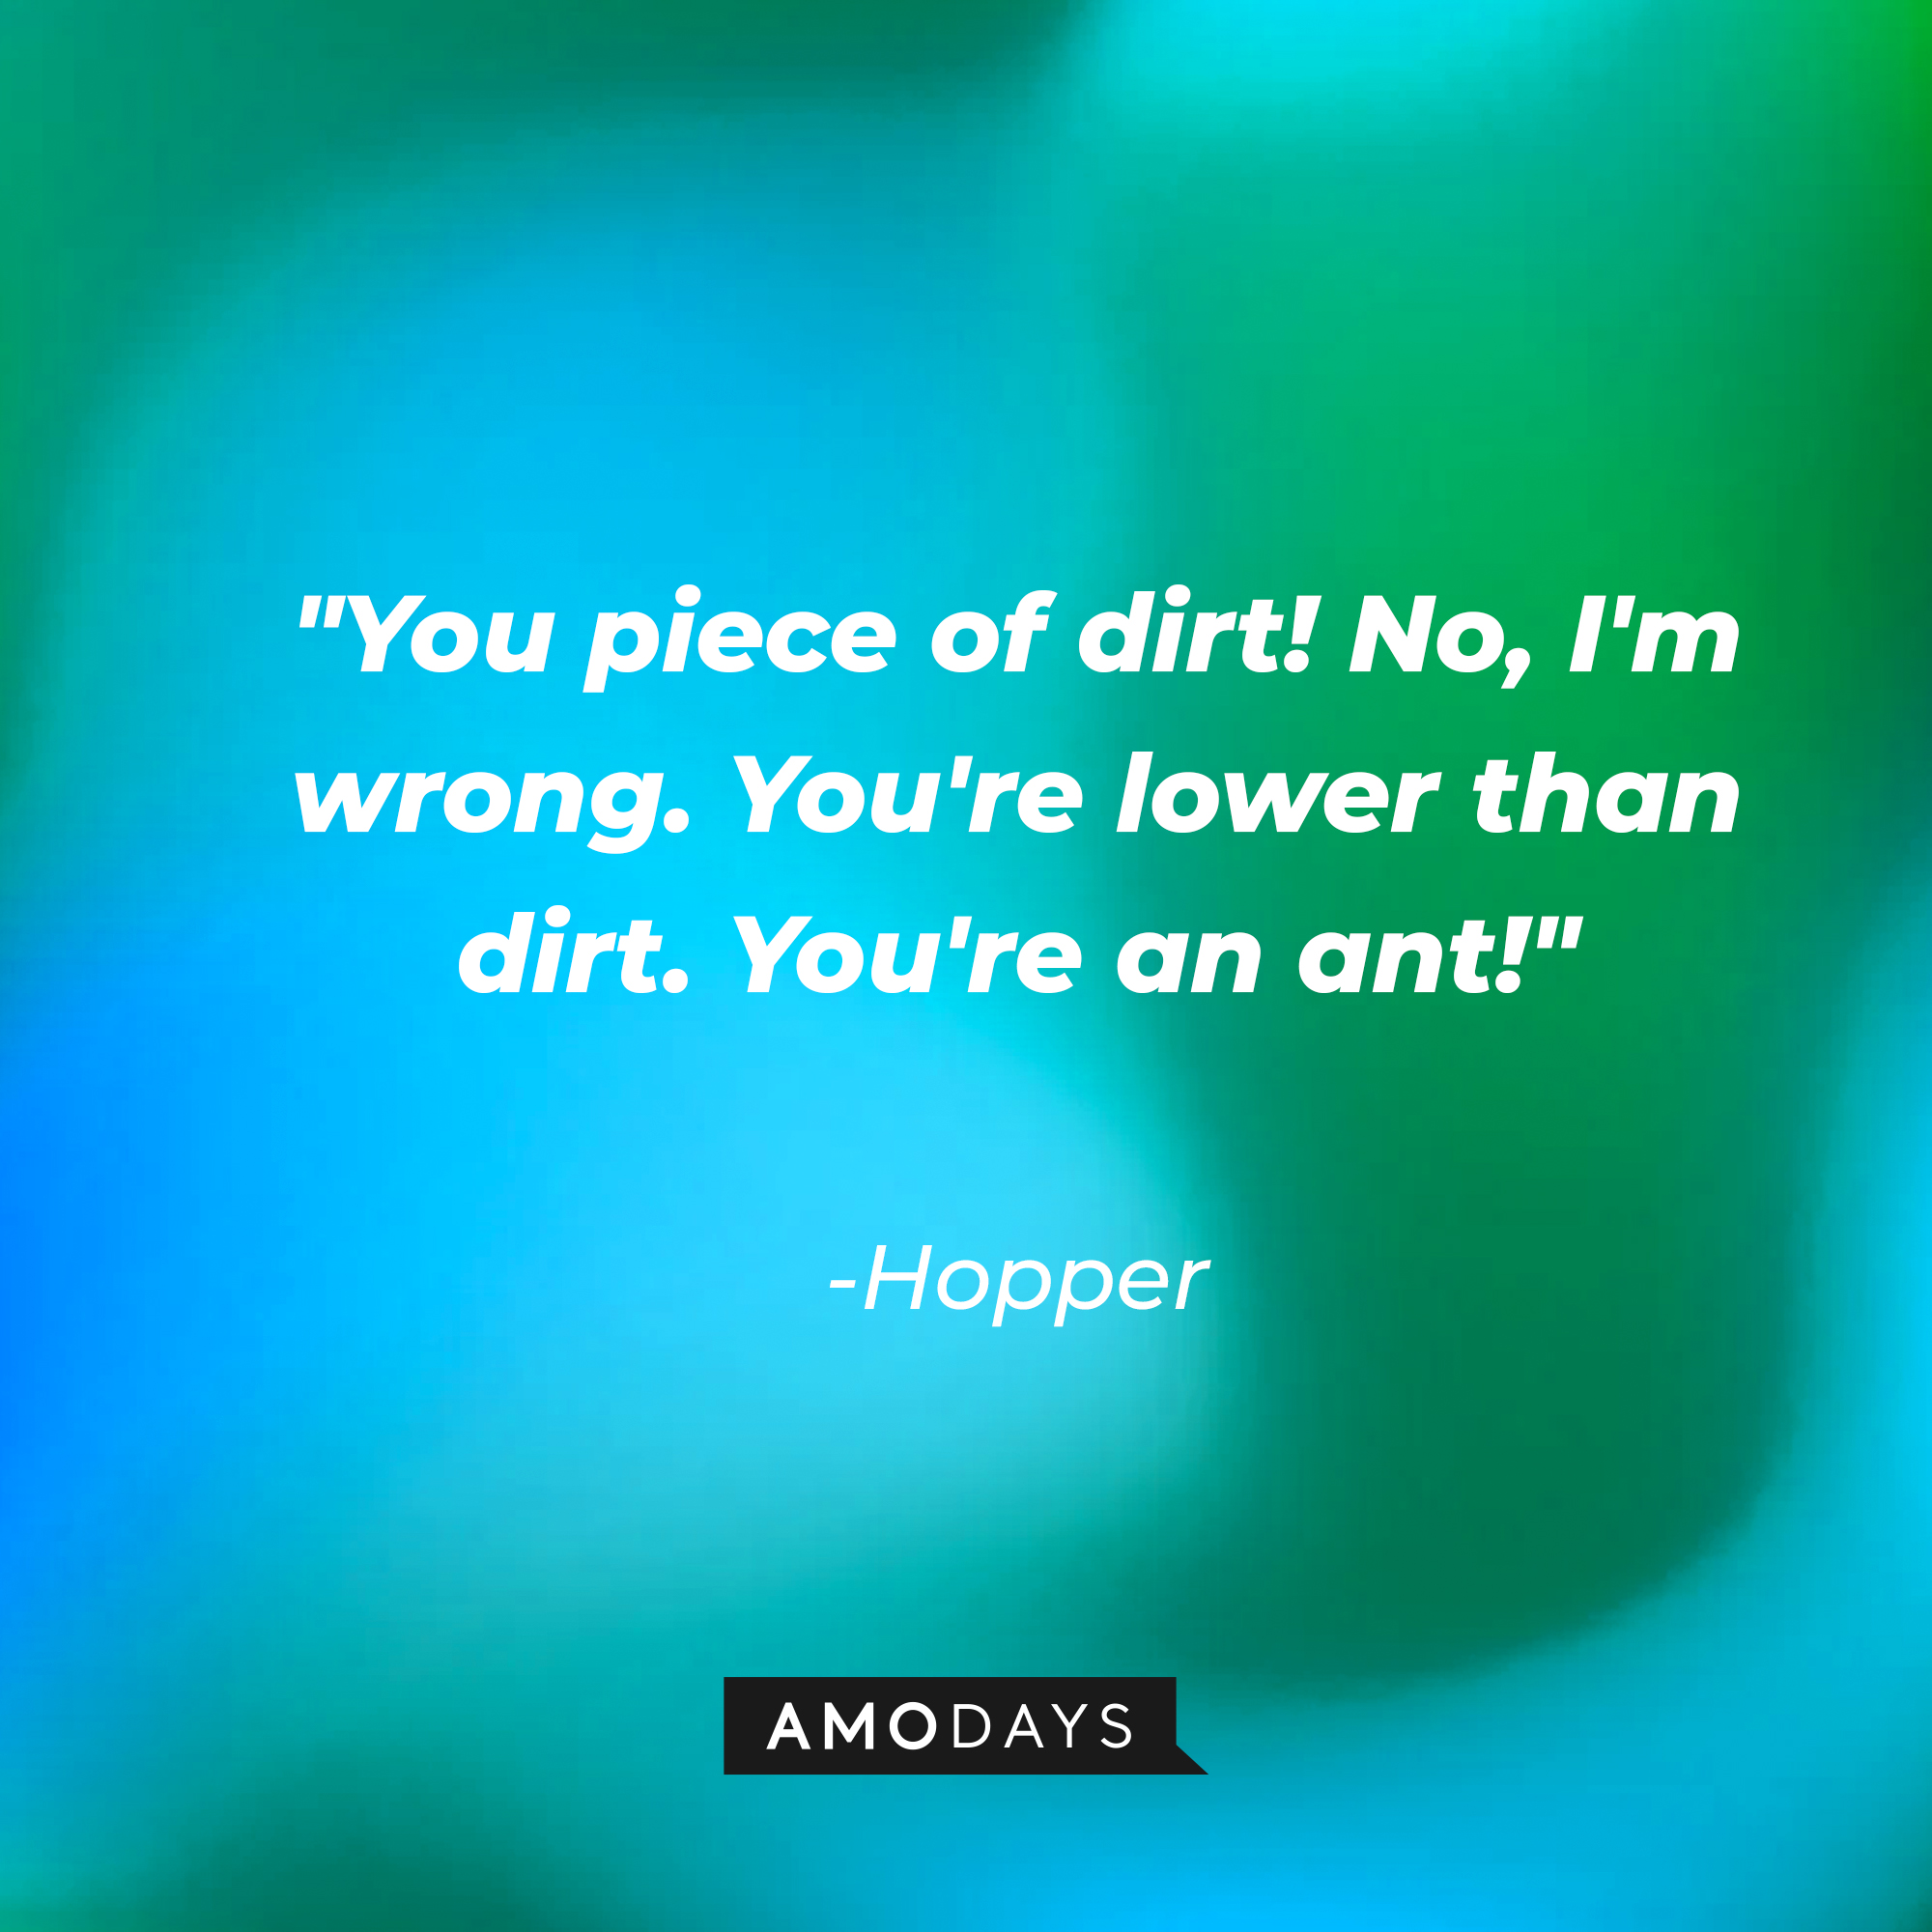 Hopper's quote: "You piece of dirt! No, I'm wrong. You're lower than dirt. You're an ant!" | Source: AmoDays